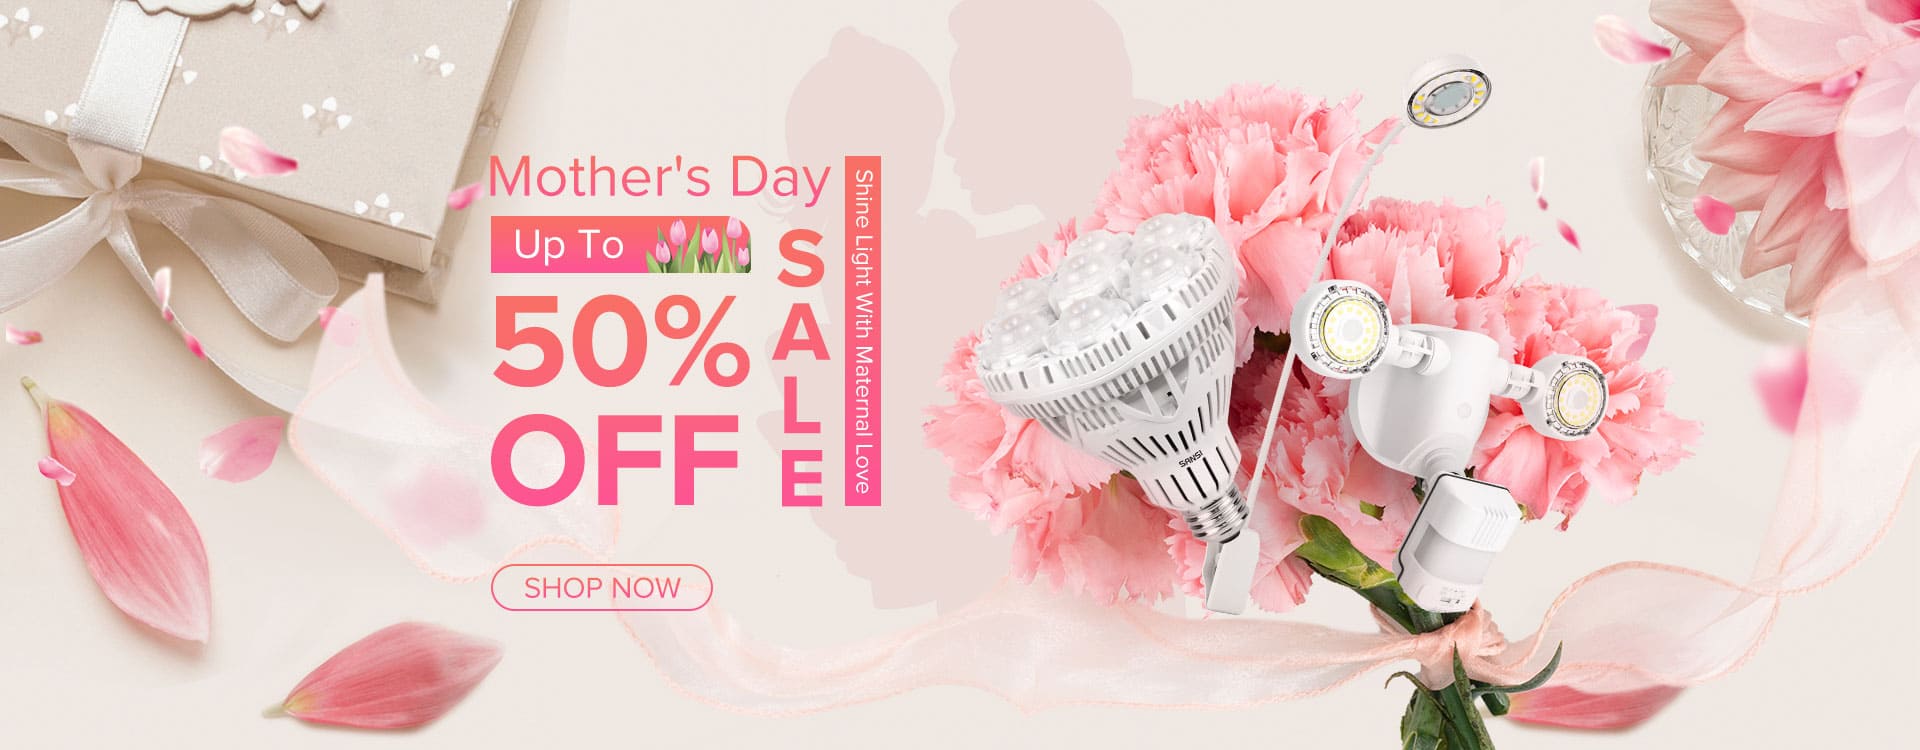 Mother's Day Sale,Up to 50% off!